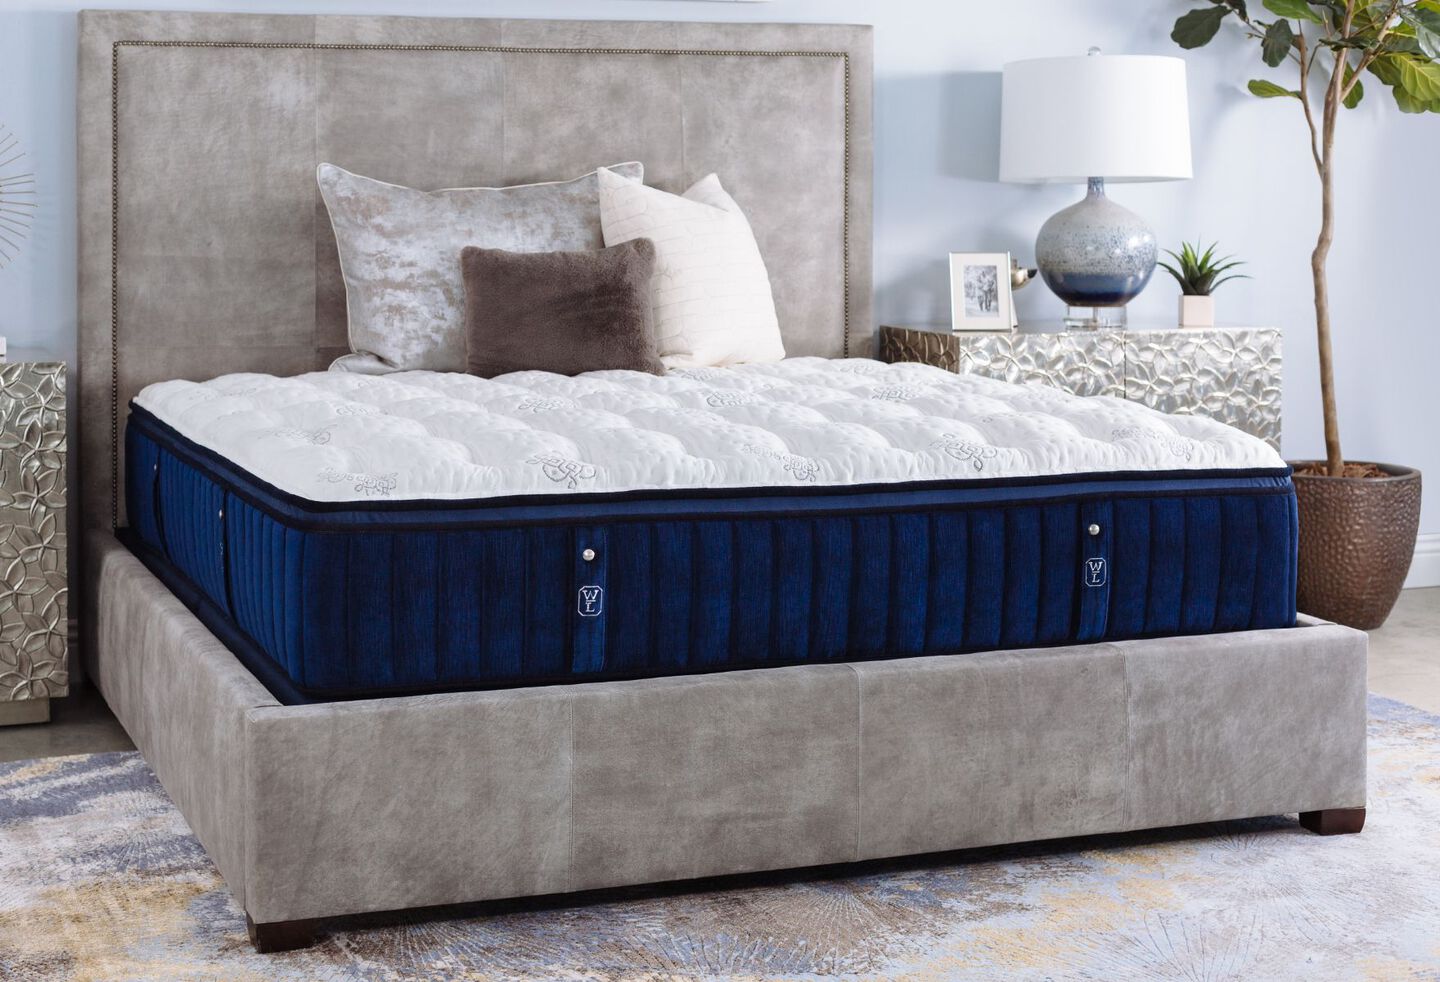 Navy blue and white William & Lawrence mattress with beige and brown pillows on top